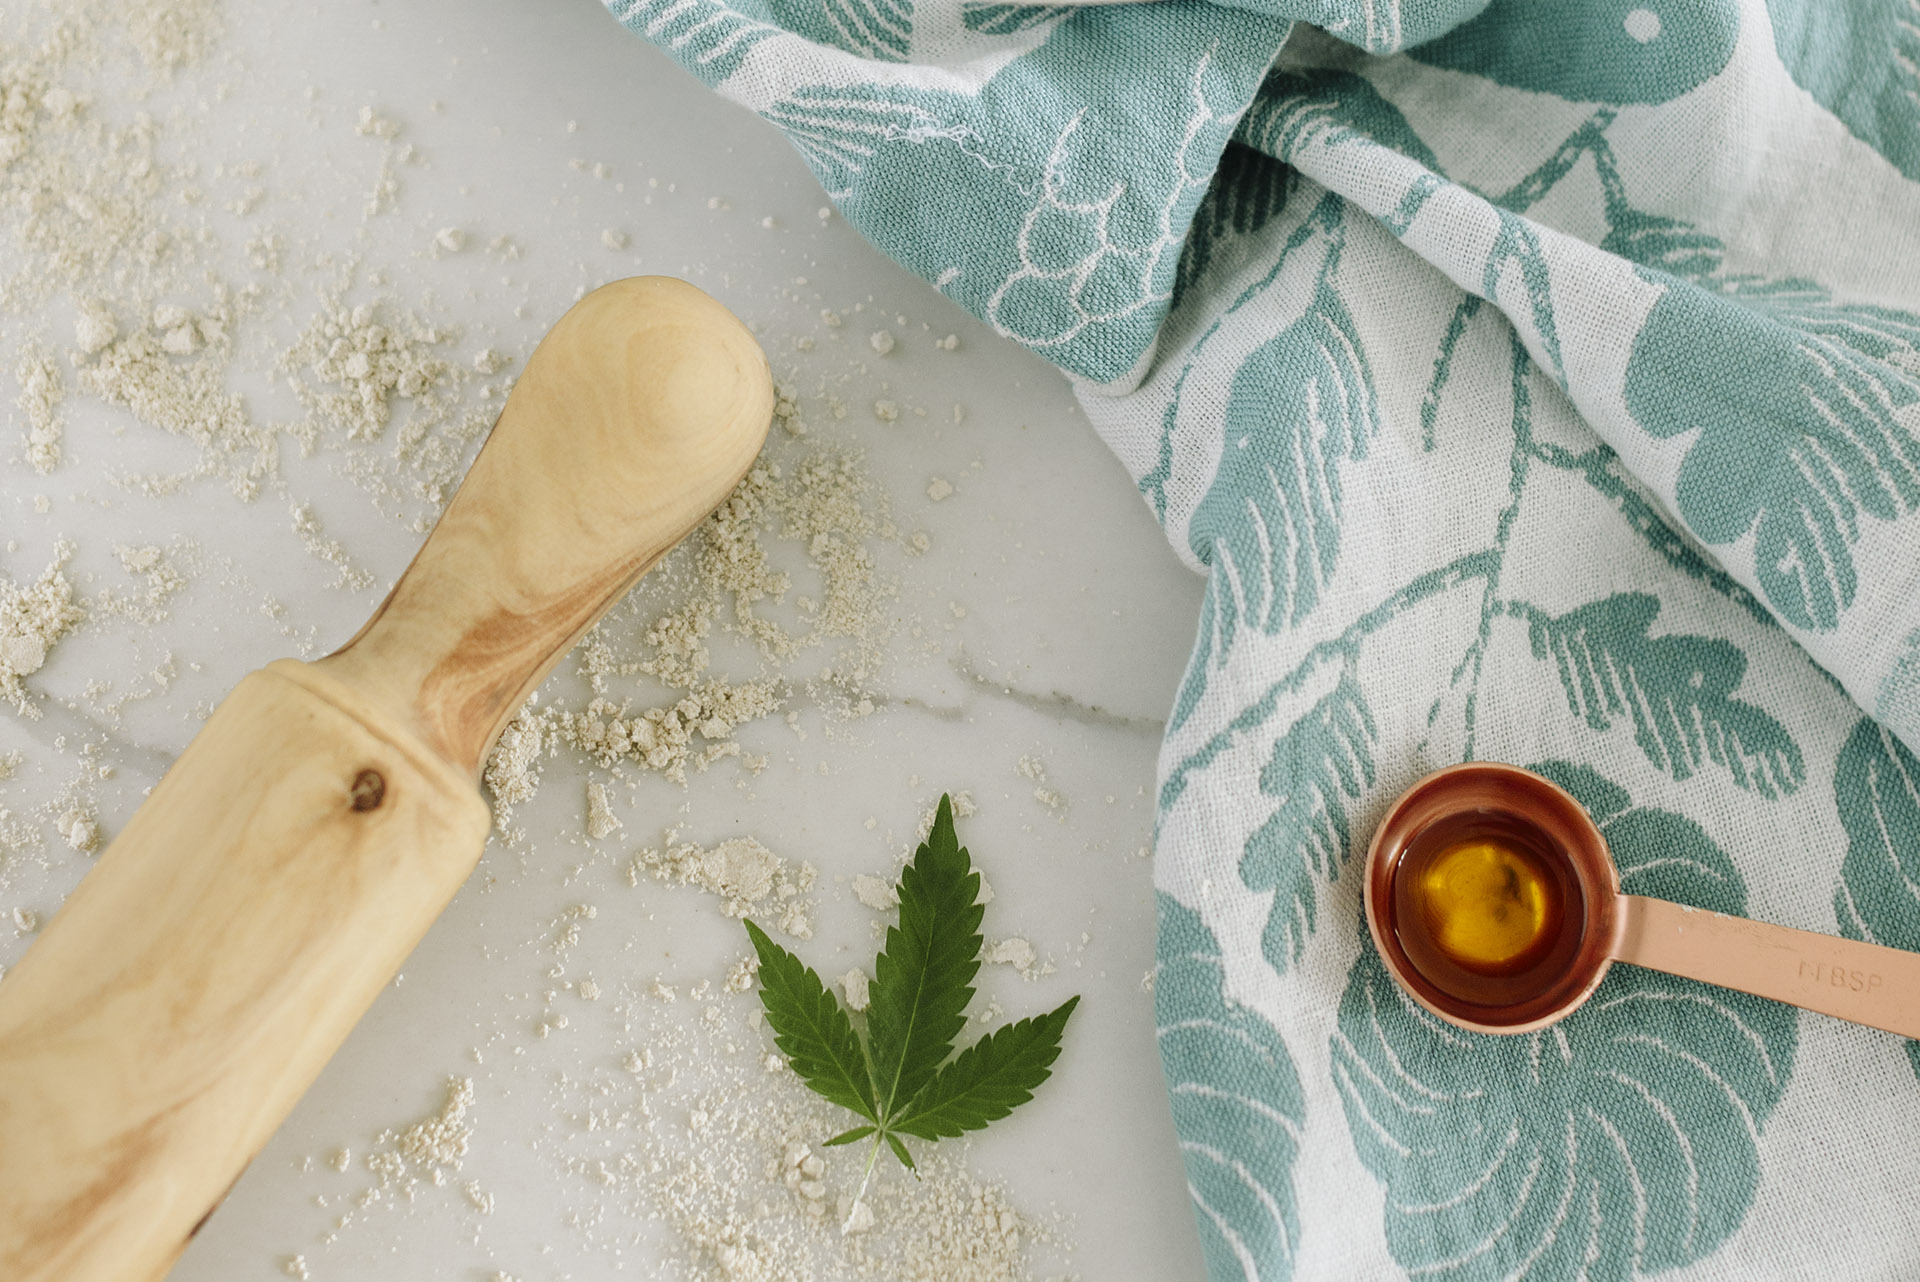 The Beginner’s Guide to Cook With CBD Oil